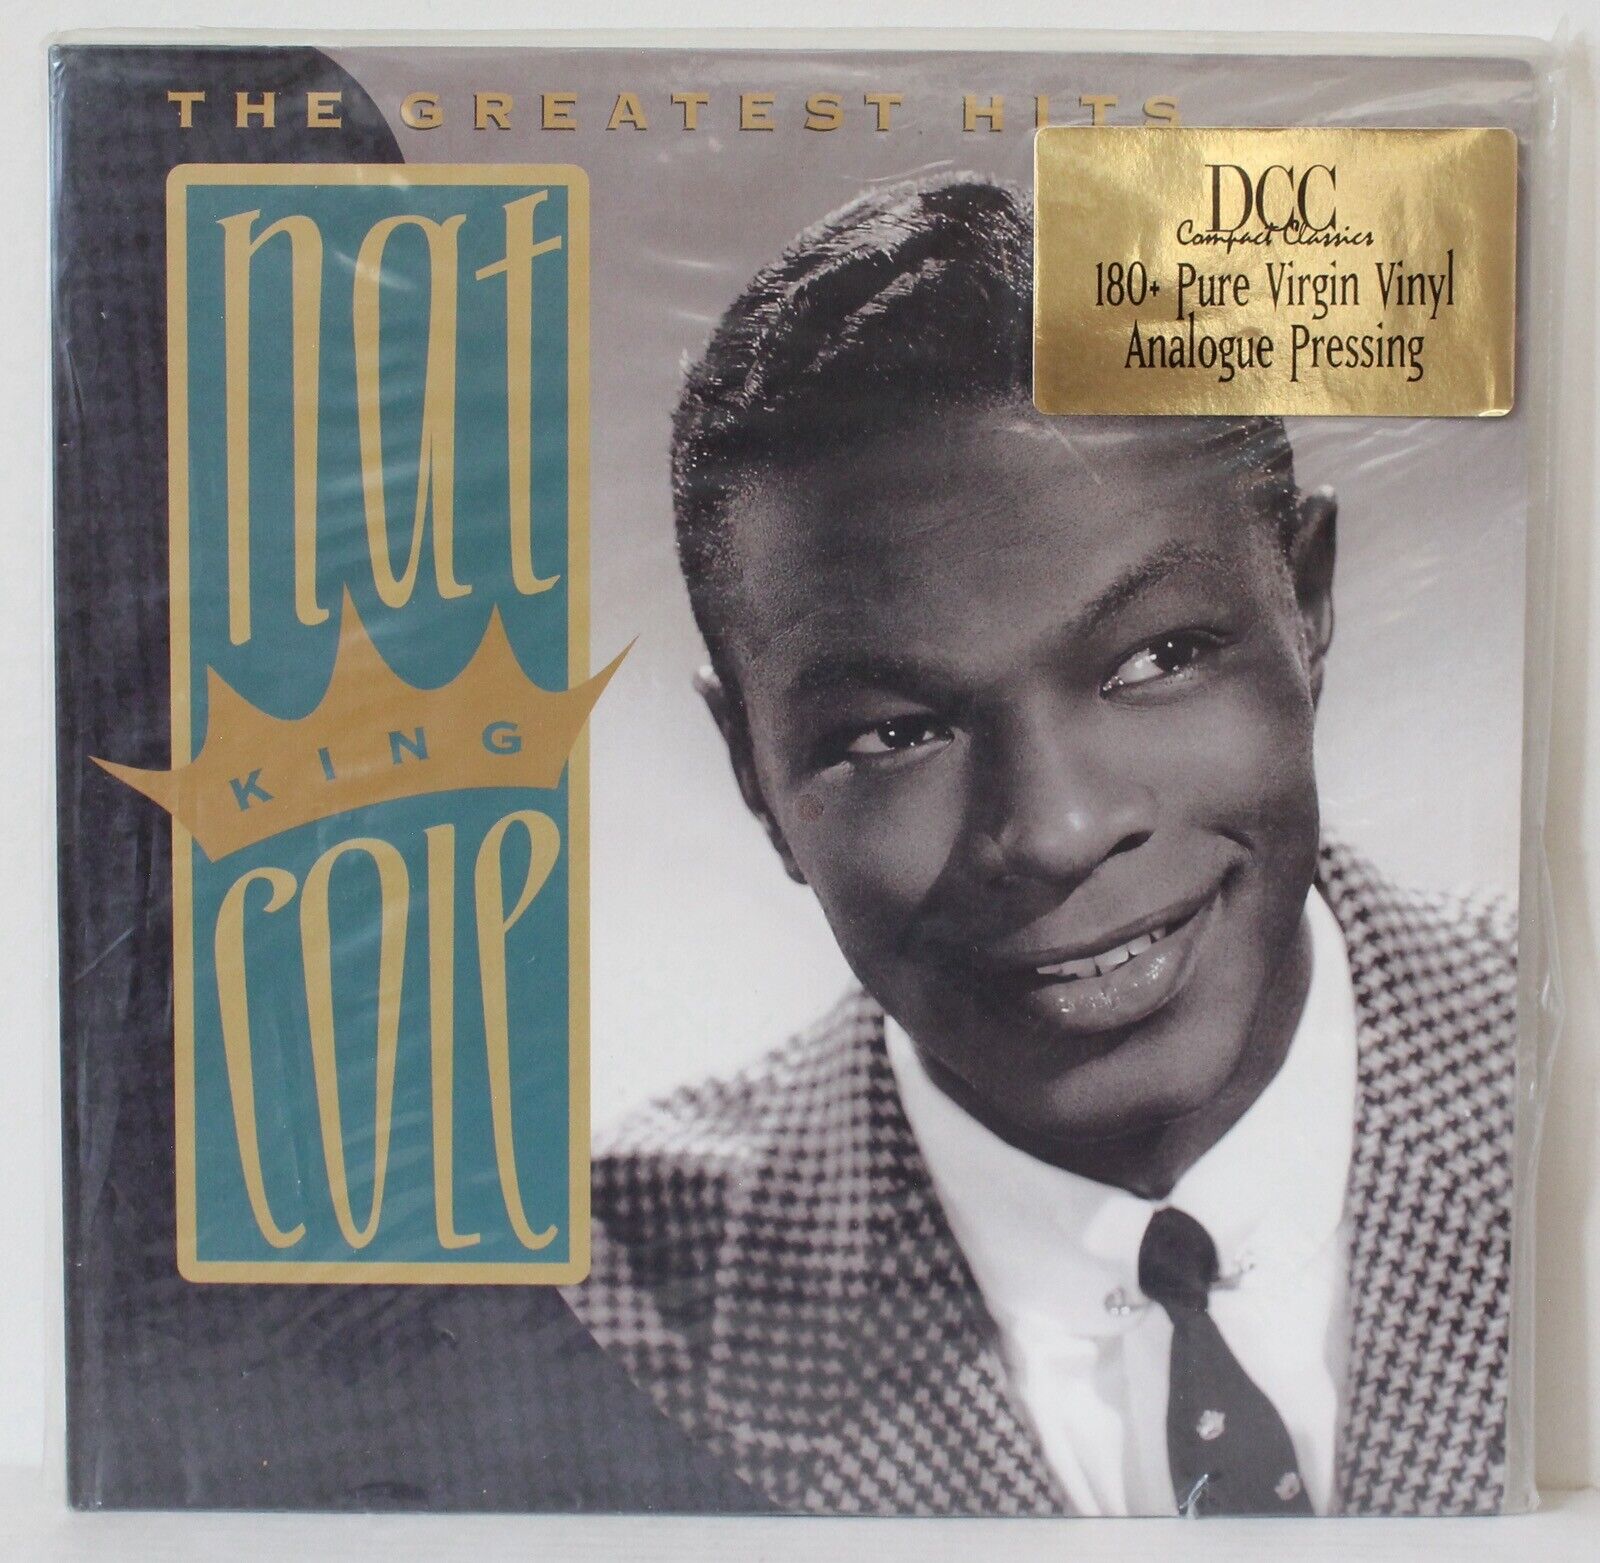 NAT KING COLE “The Greatest Hits” 2xLP (DCC Compact Classics) SEALED Audiophile